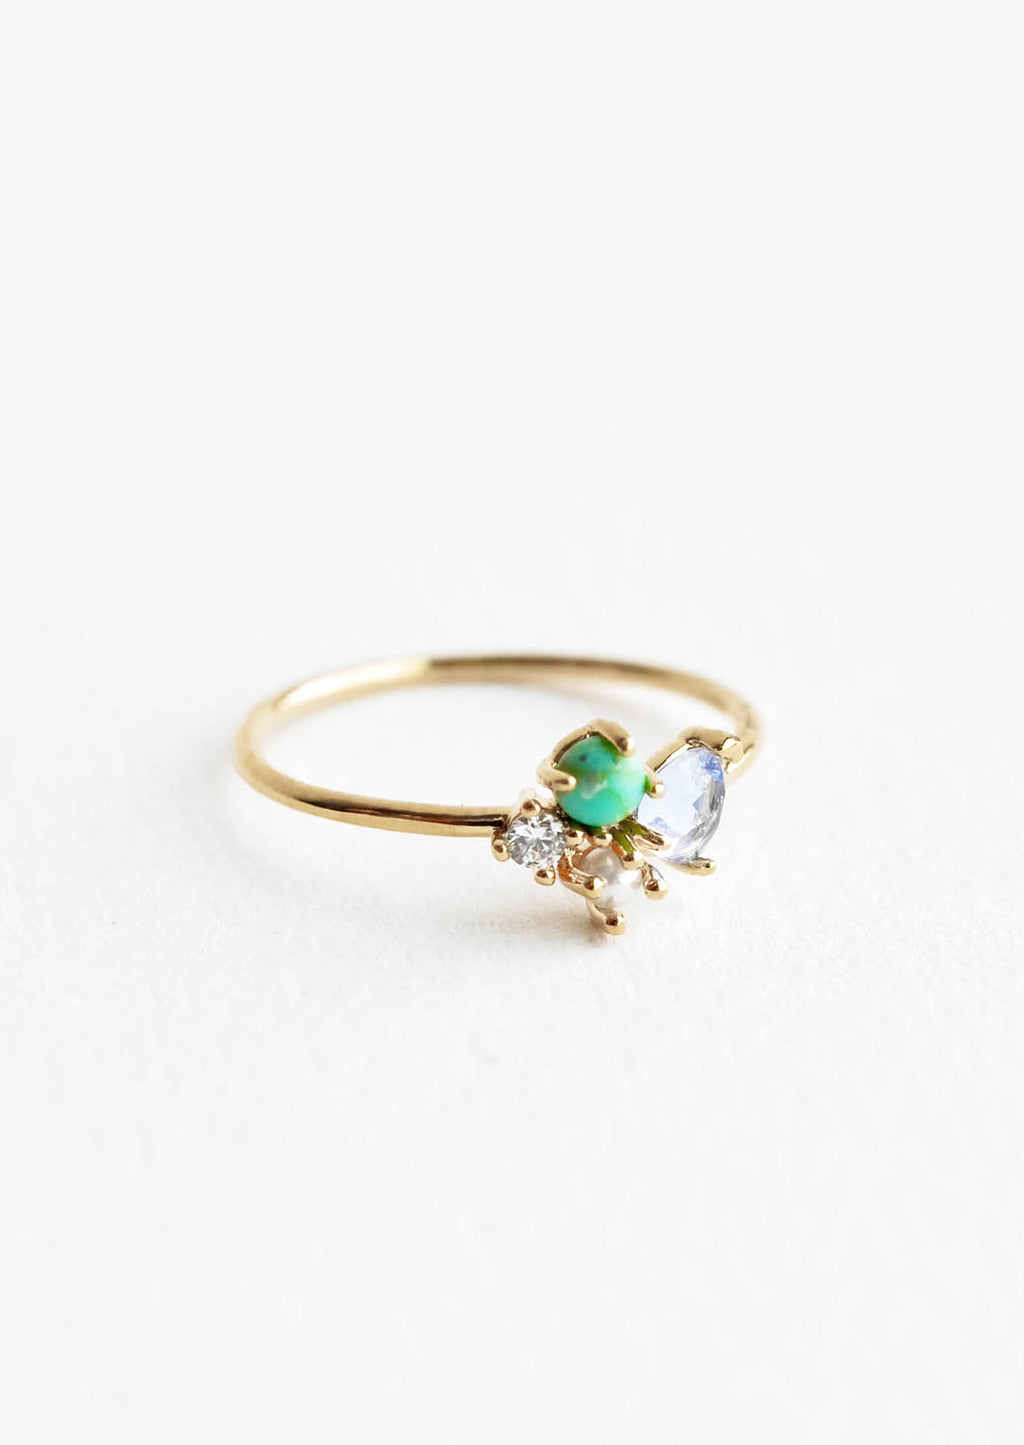 Turquoise Multi / Size 6: Gold ring featuring slim band with two gemstones and two crystals in blue, green and white hues, prong set in a cluster.